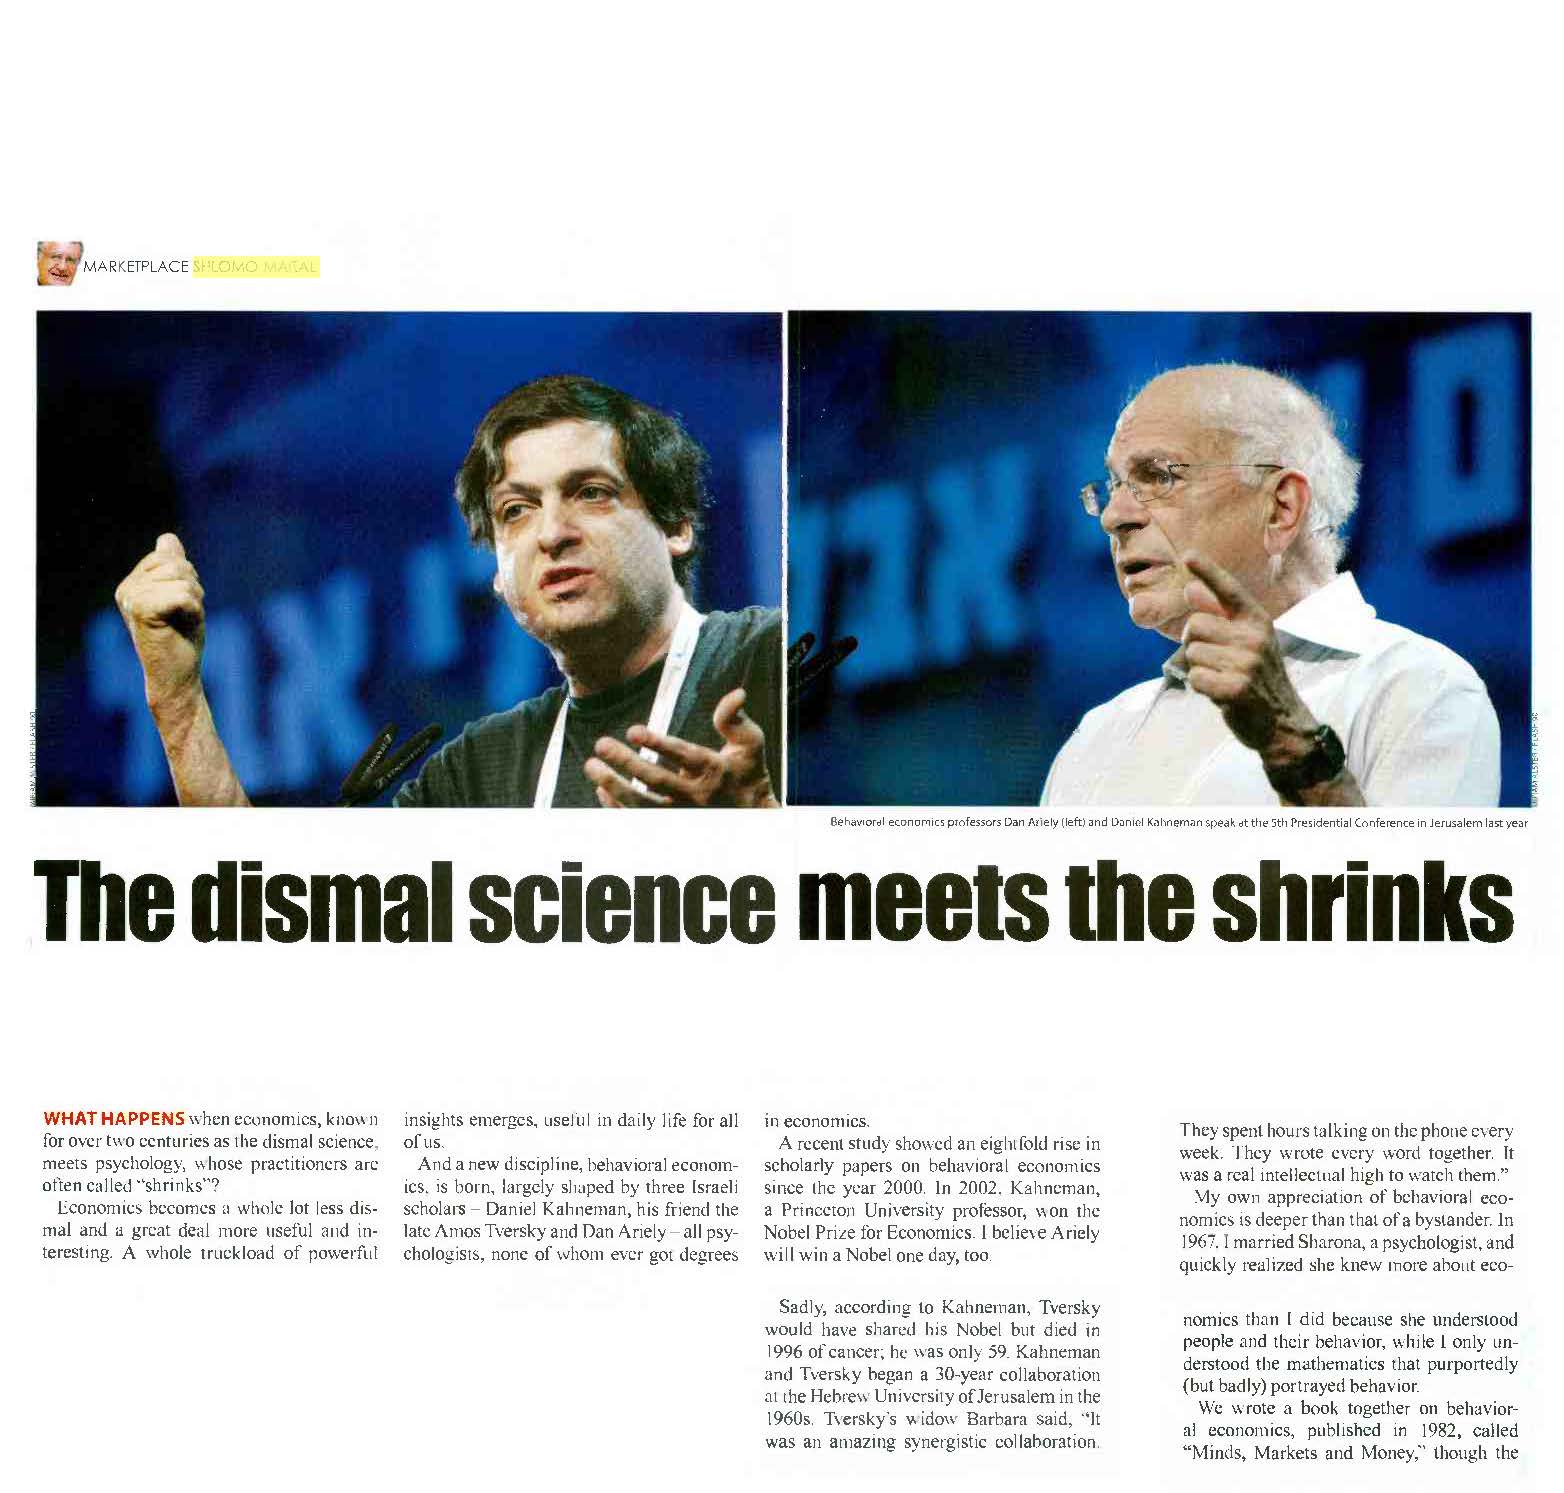 The dismal science meets the shrinks